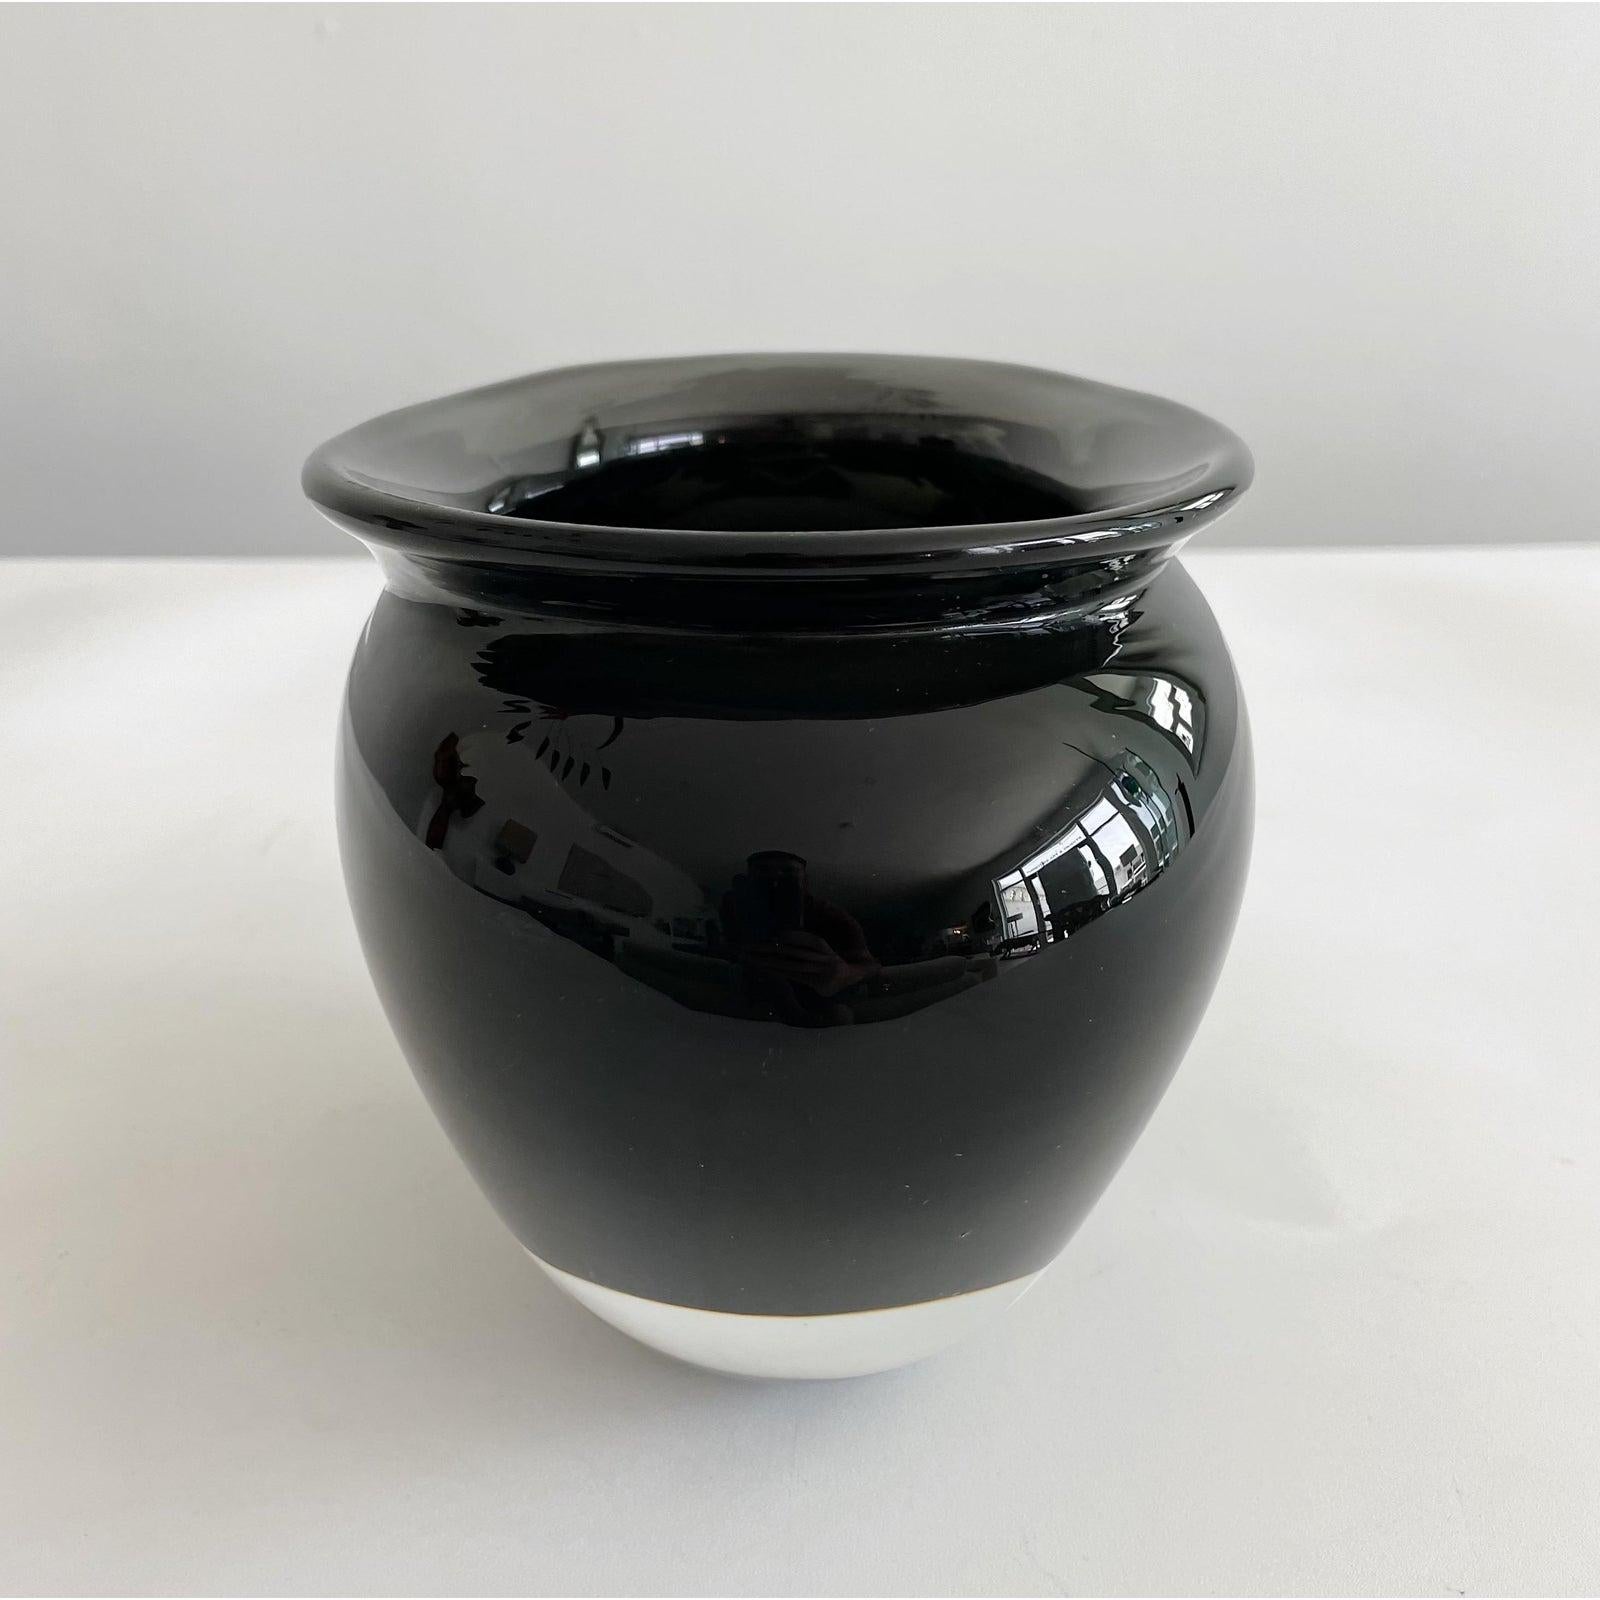 European Vintage Black and Clear Sommerso Vase by Antonio Da Ros for Cenedese